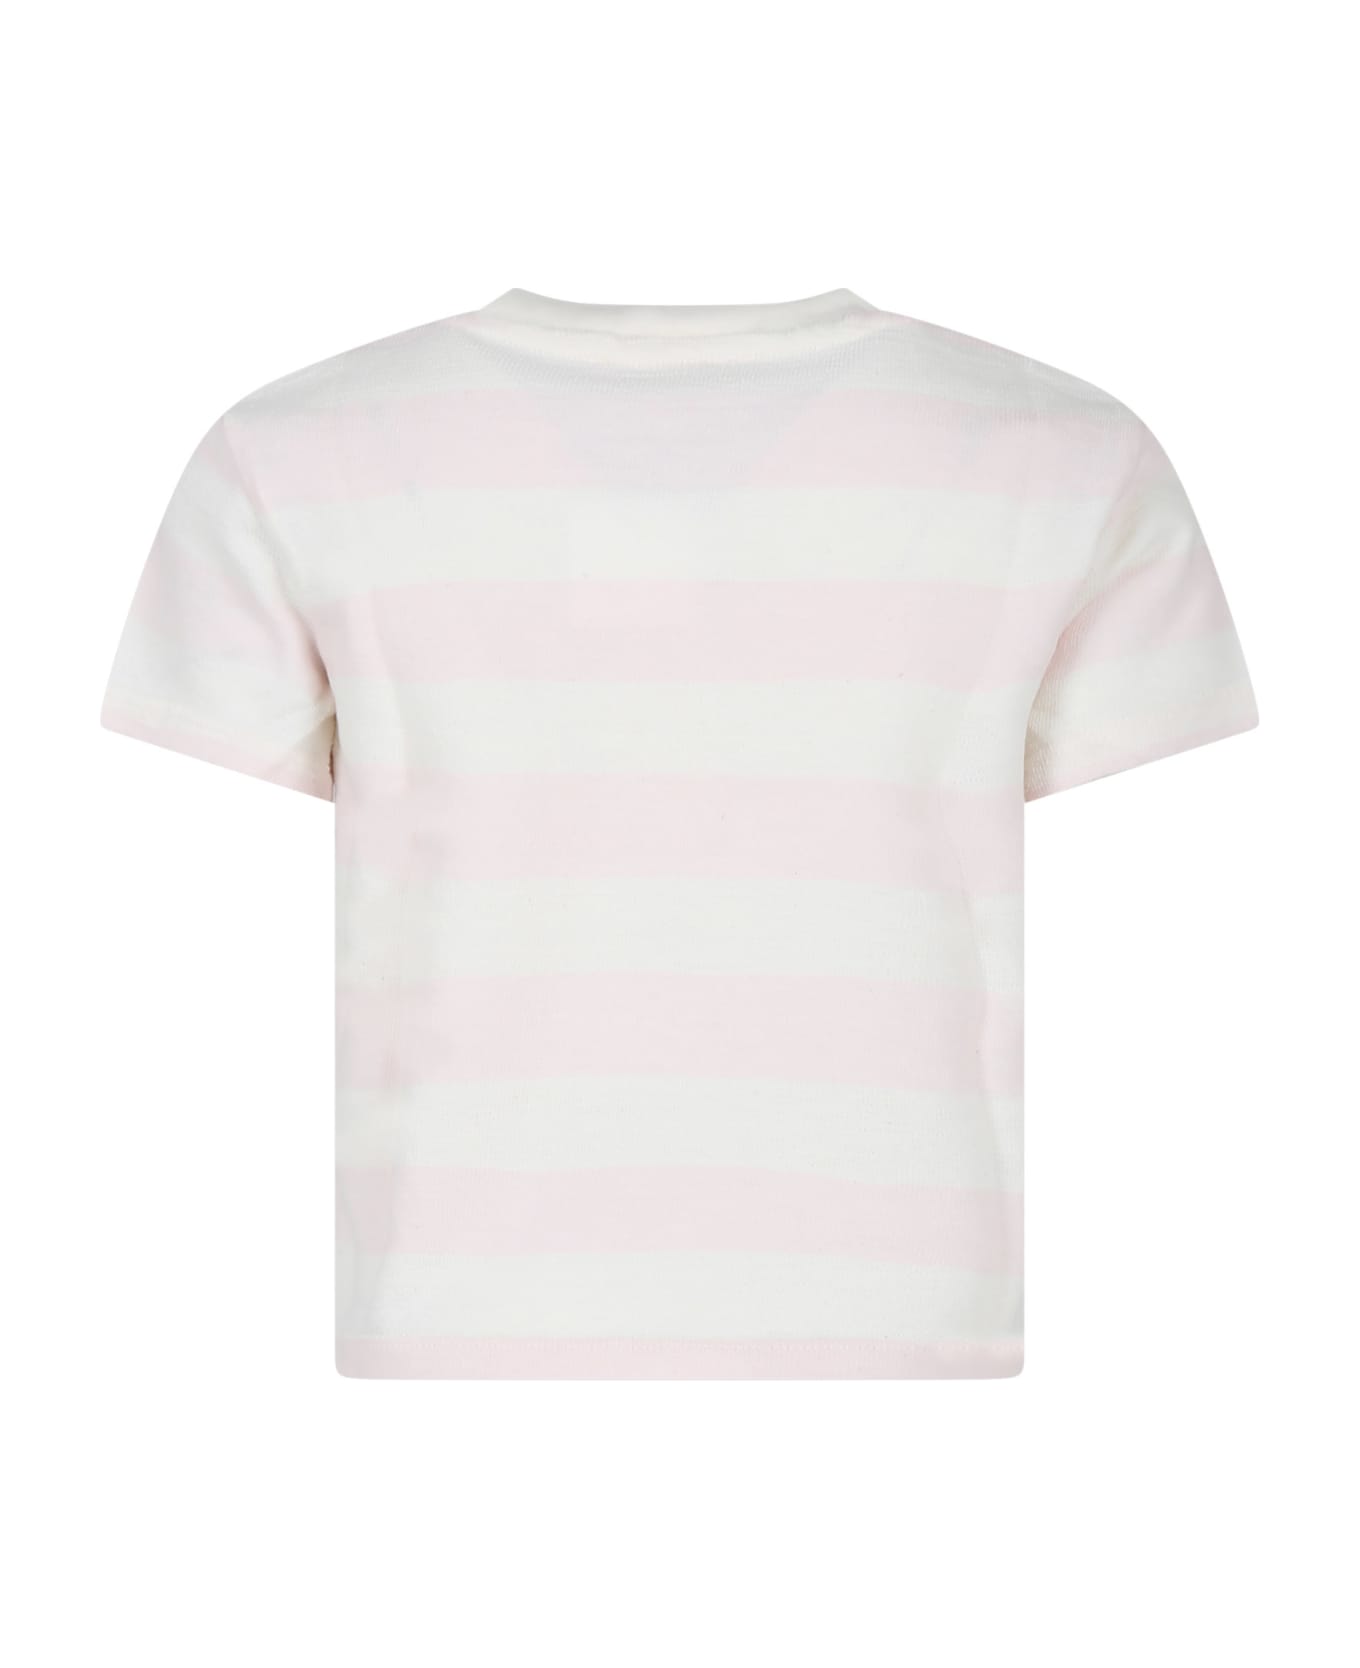 Bonpoint Ivory T-shirt For Girl With Iconic Cherries - PINK